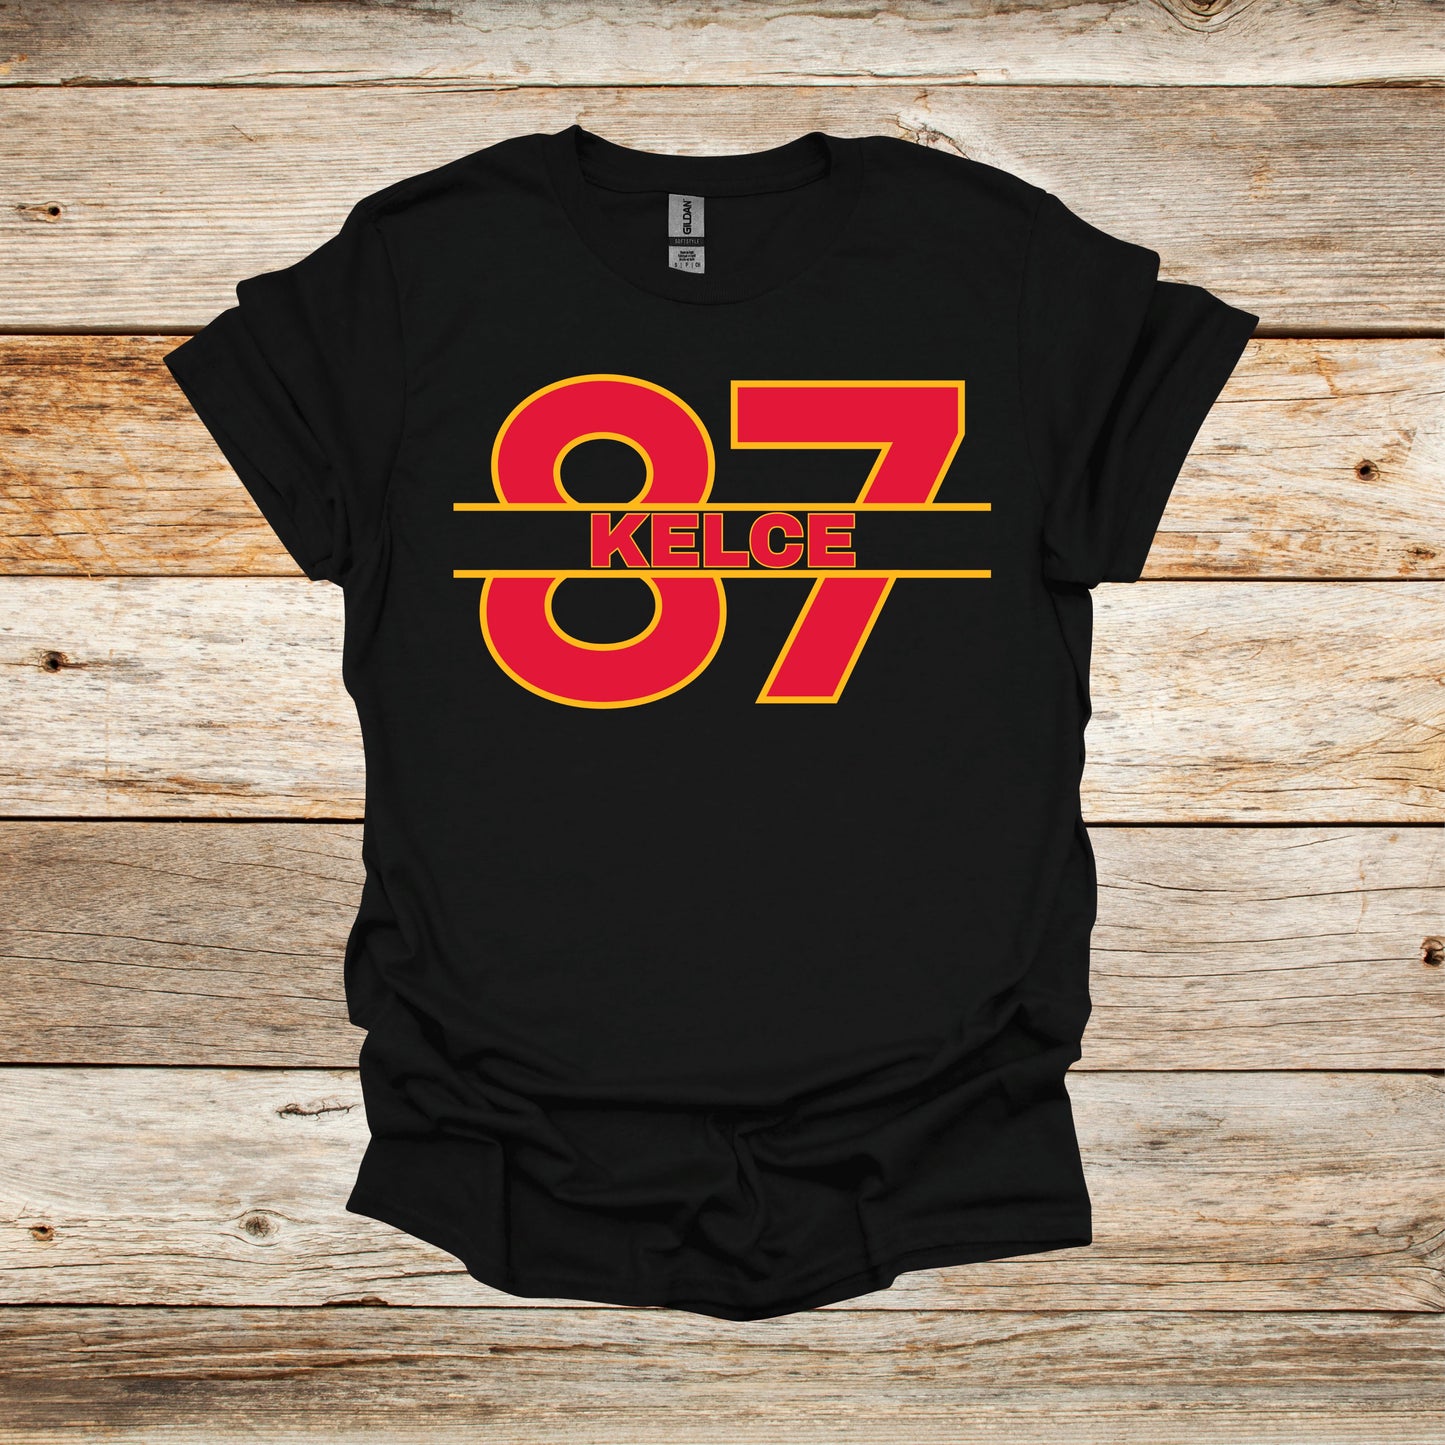 Football T-Shirt - Chiefs Football - 87 Kelce - Adult and Children's Tee Shirts - Sports T-Shirts Graphic Avenue Black Adult Small 